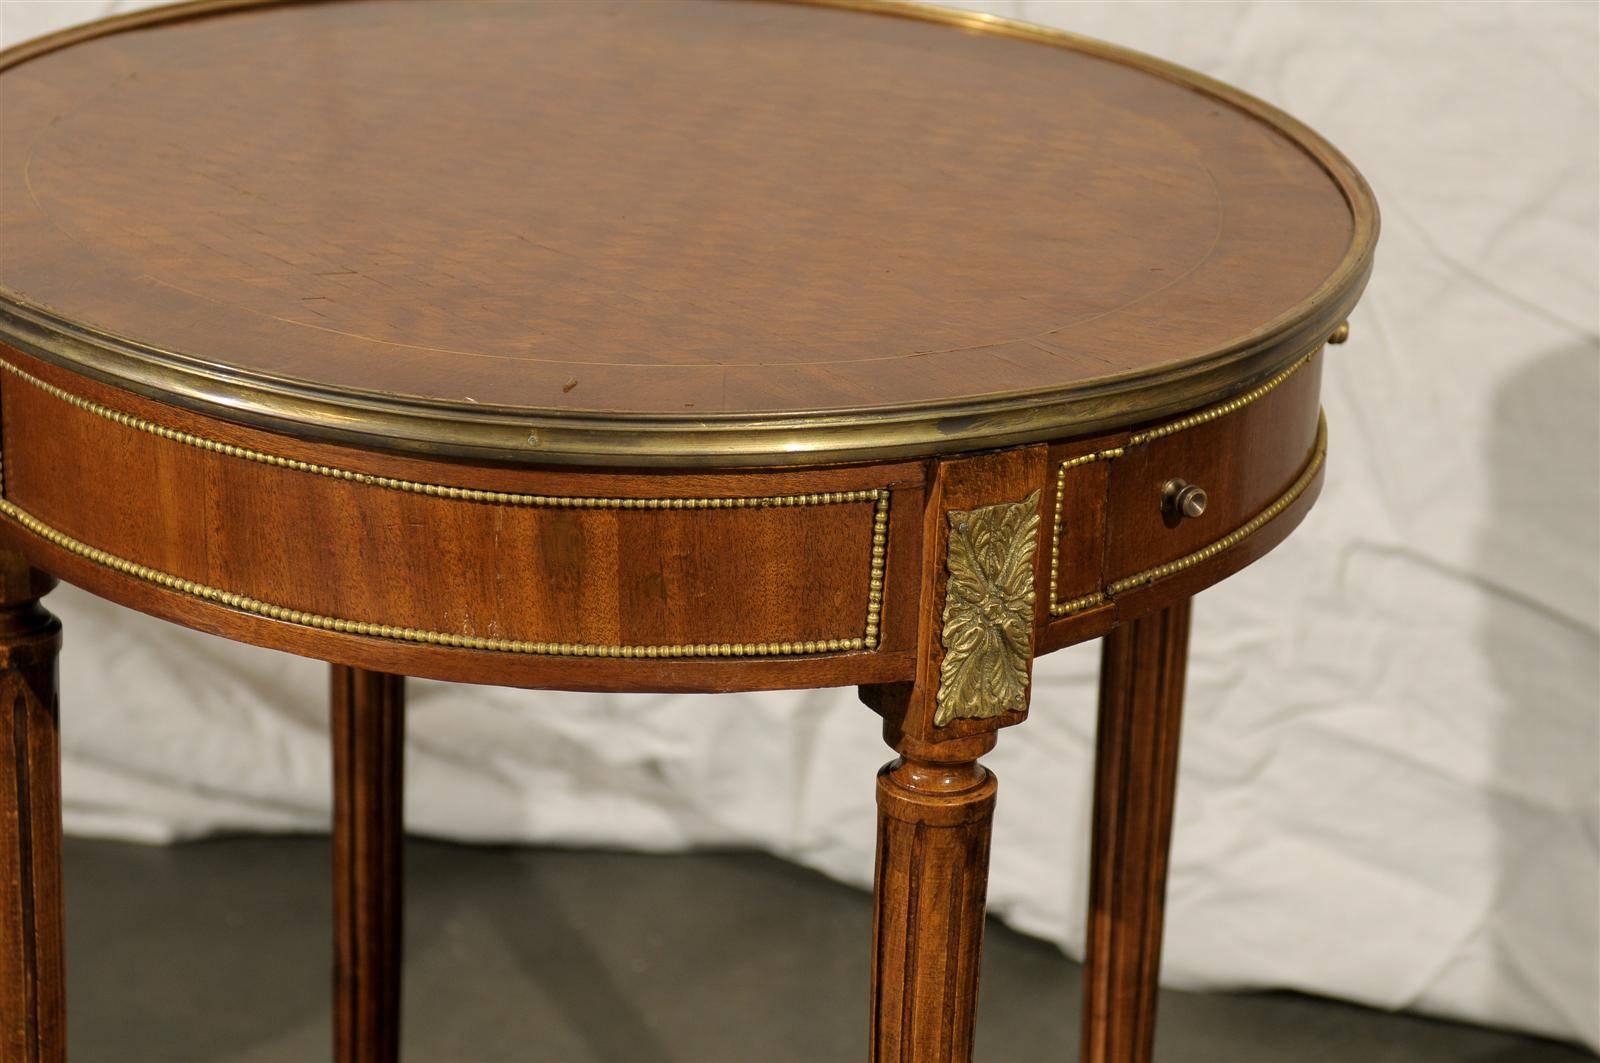 Early 20th Century French Bronze-Mounted Inlaid Bouilotte Table 7